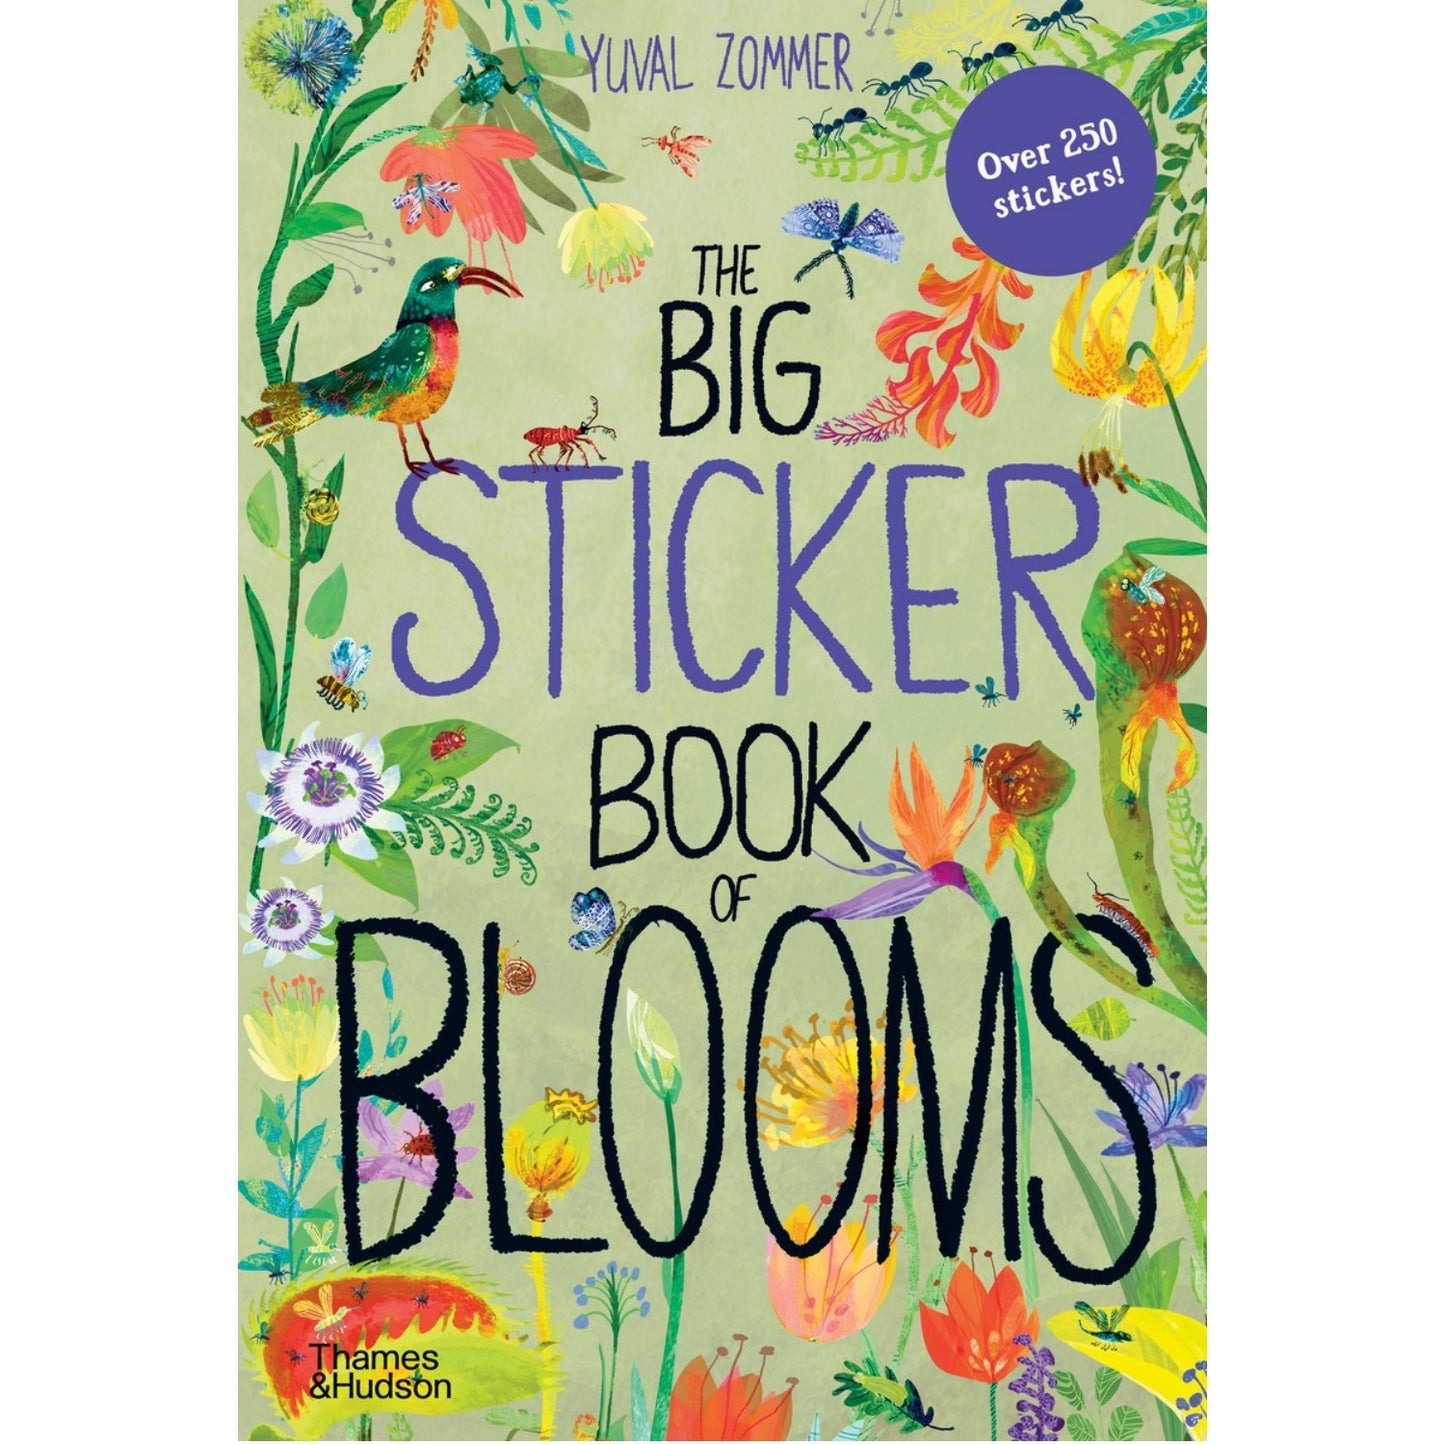 The Big Sticker Book of Blooms | Children's Activity Book on Plants & Flowers